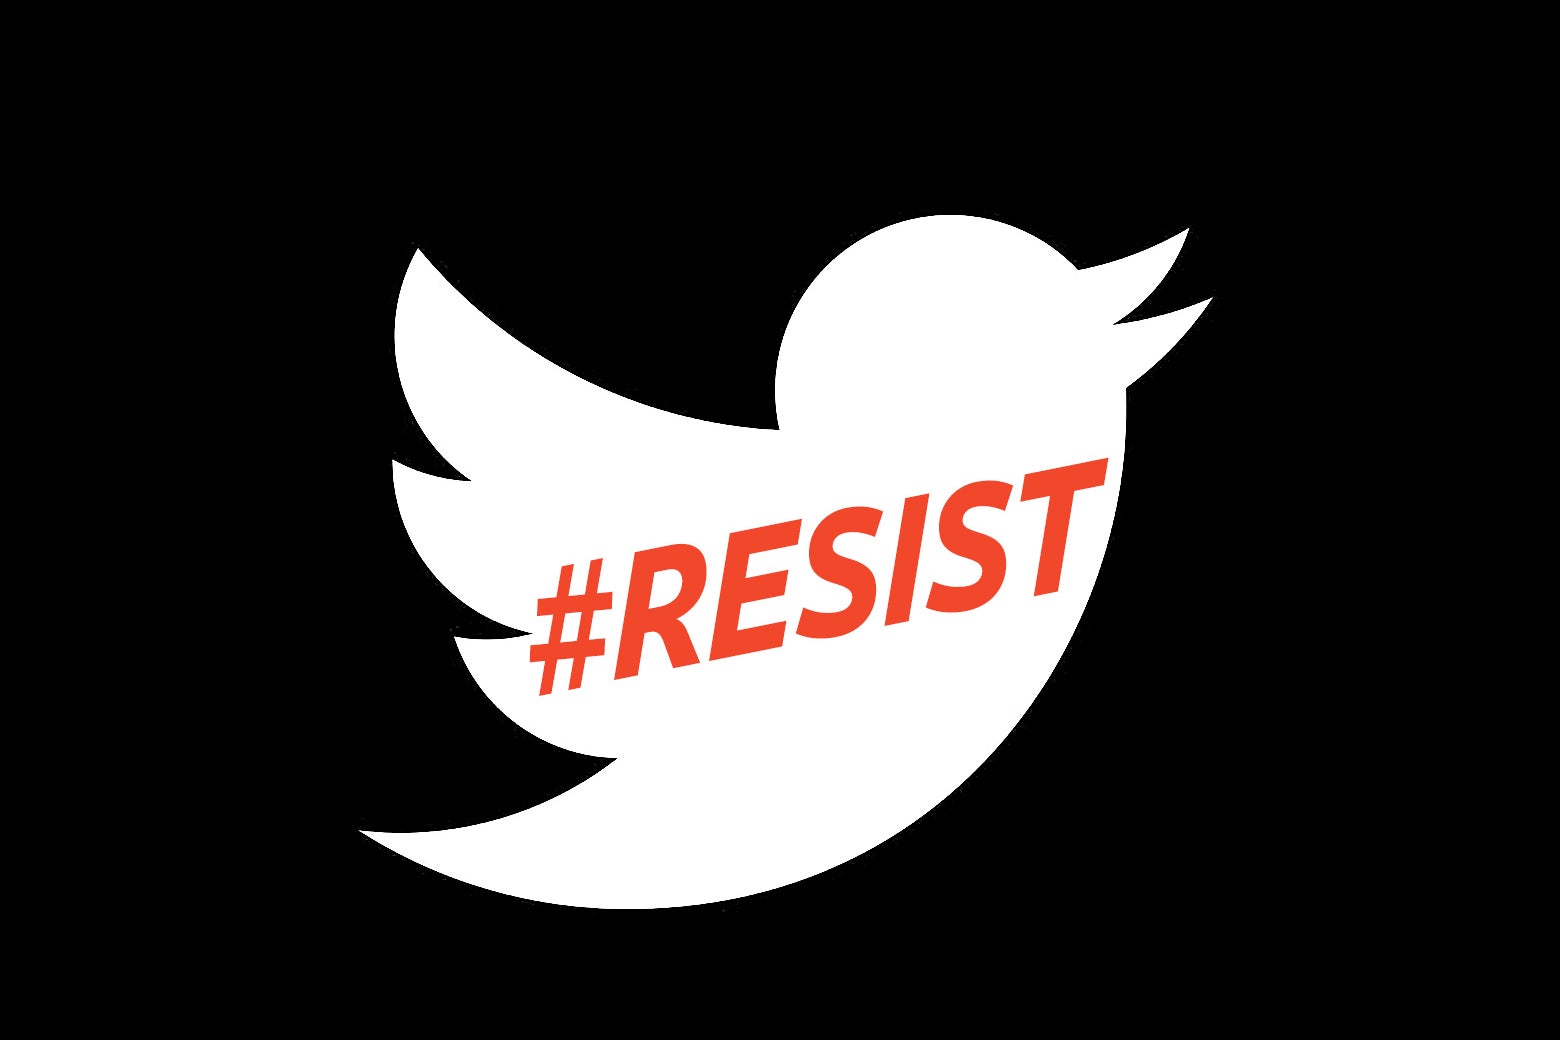 The Twitter bird containing the hashtag #resist.